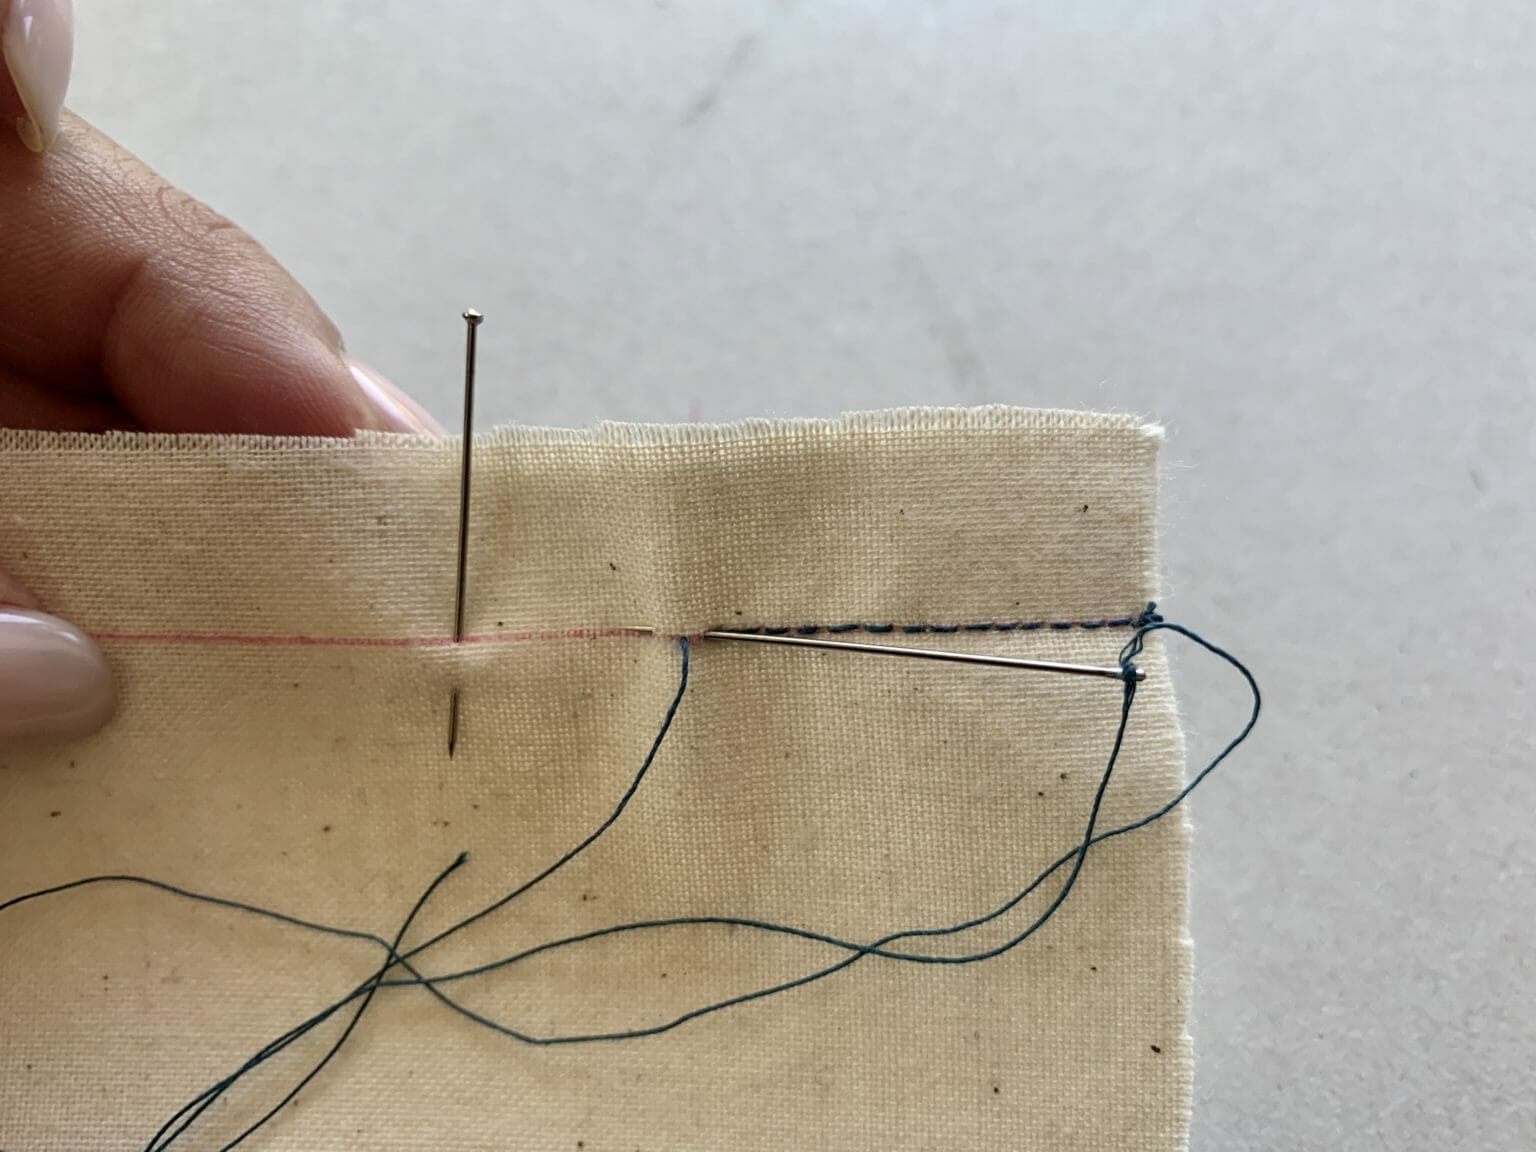 Hand Sewing Stitches For Making Clothes By Hand